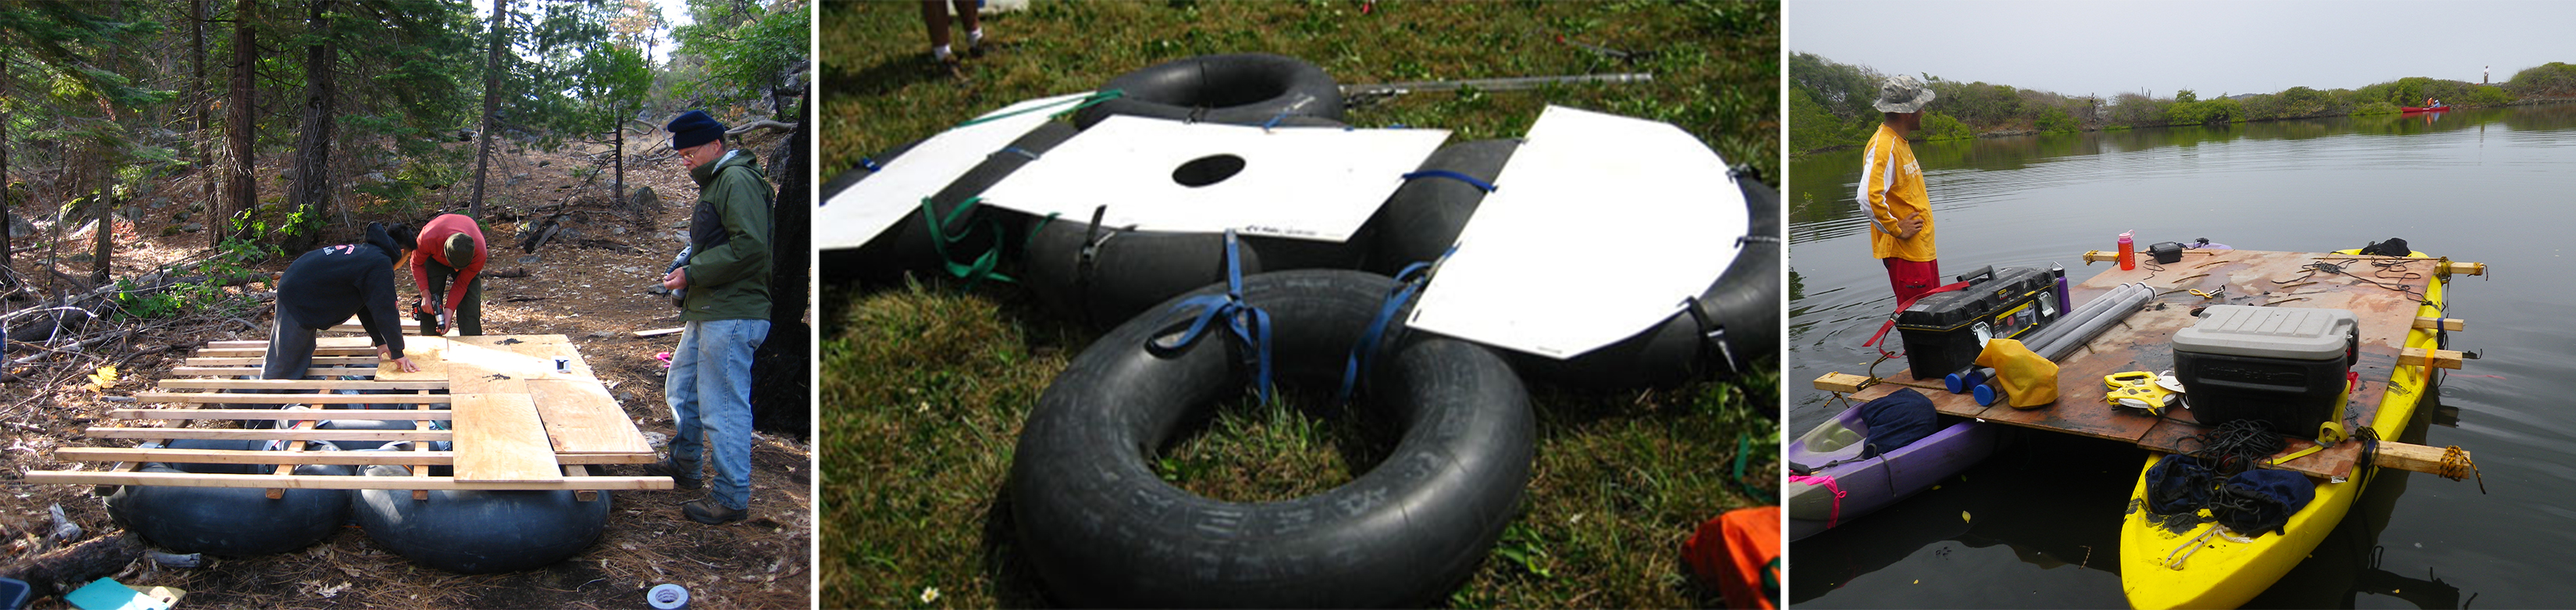 Three photos of boats constructed from inner tubes, plywood and other locally sourced materials